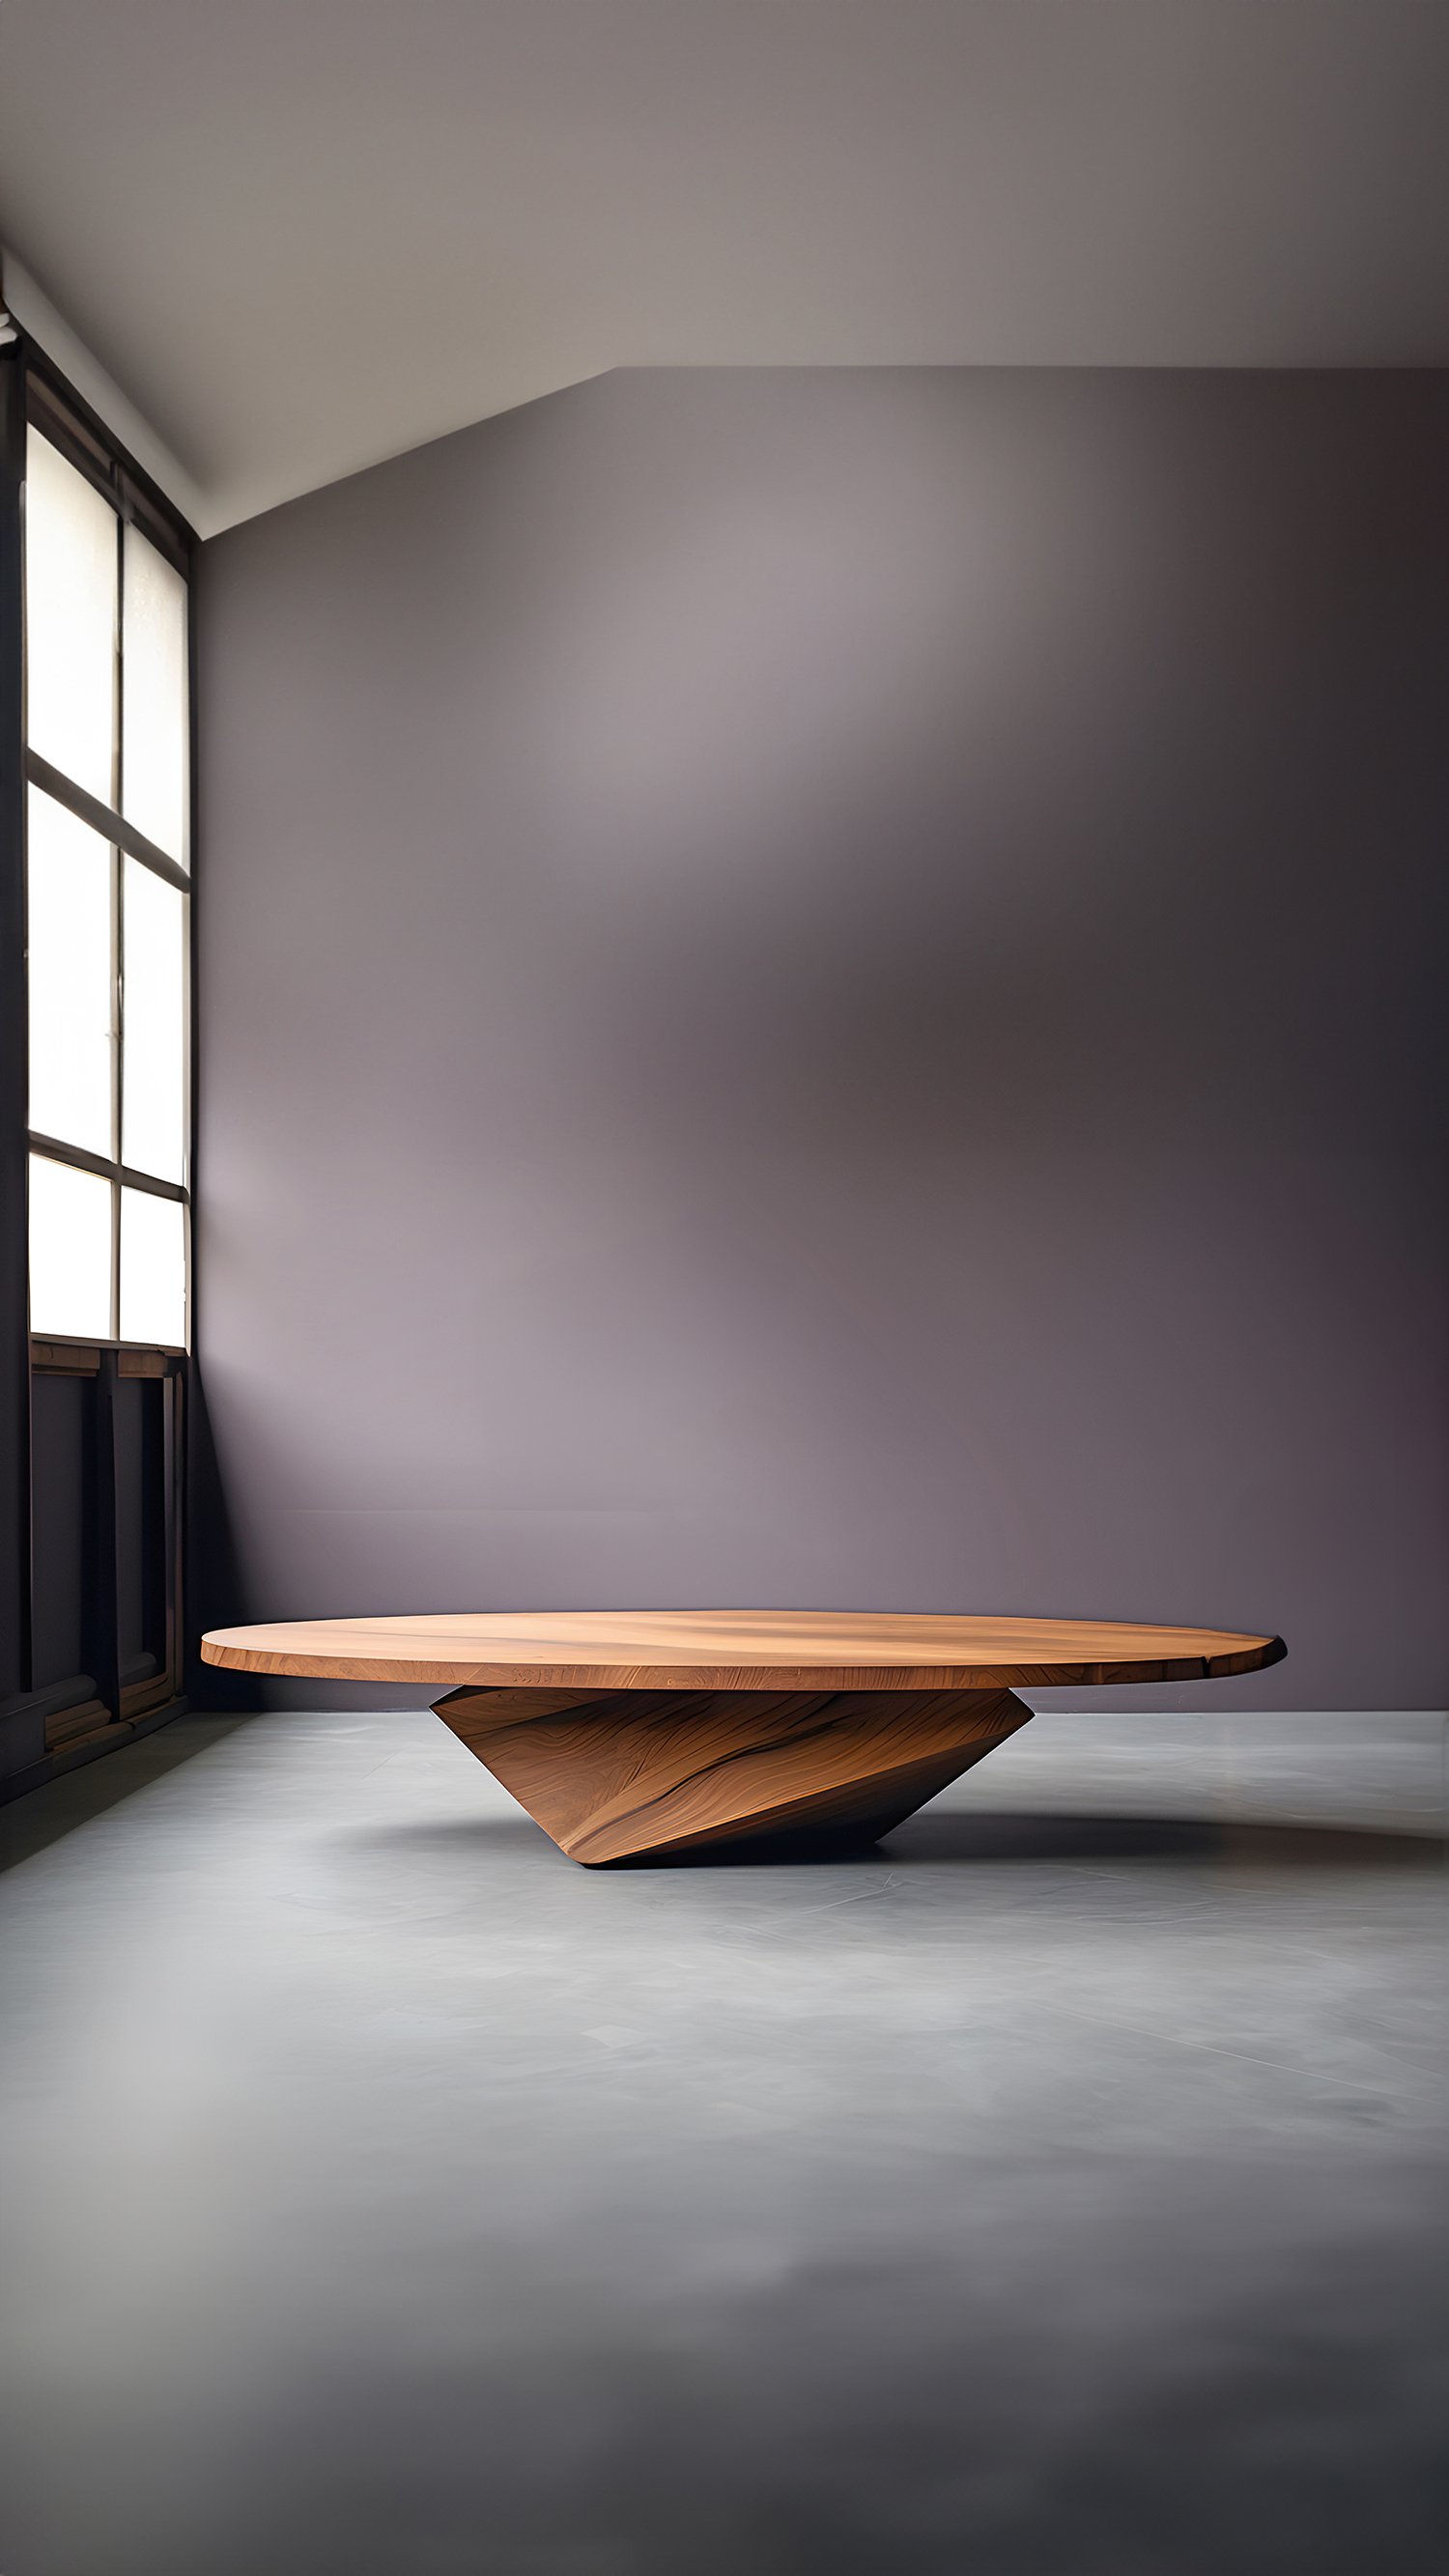 Sculptural Coffee Table Made of Solid Wood, Center Table Solace S10 by Joel Escalona — 7.jpg